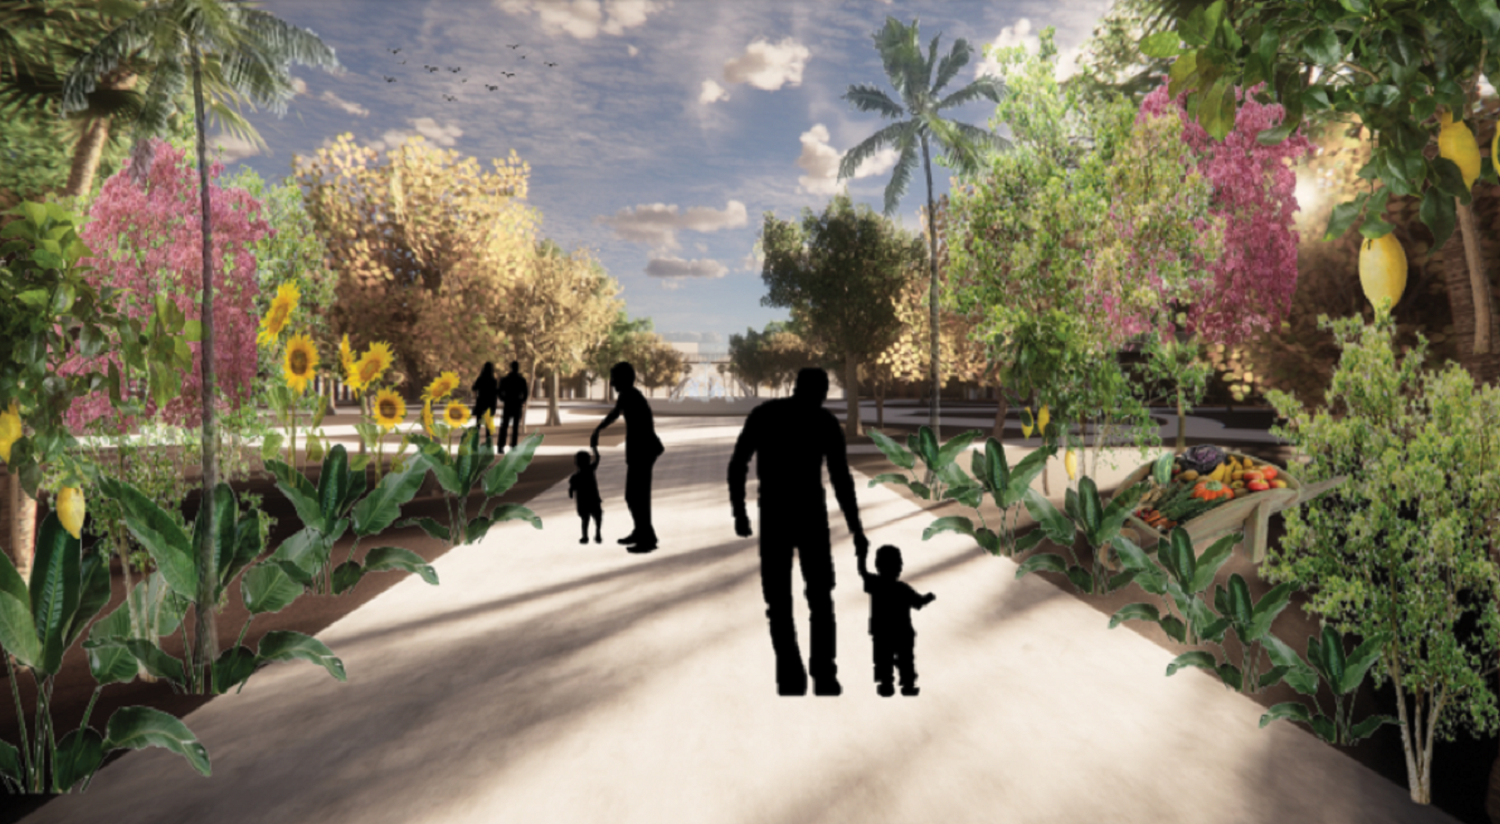 image of the entrance to the main shared facility, showing path, trees, plants and people walking.